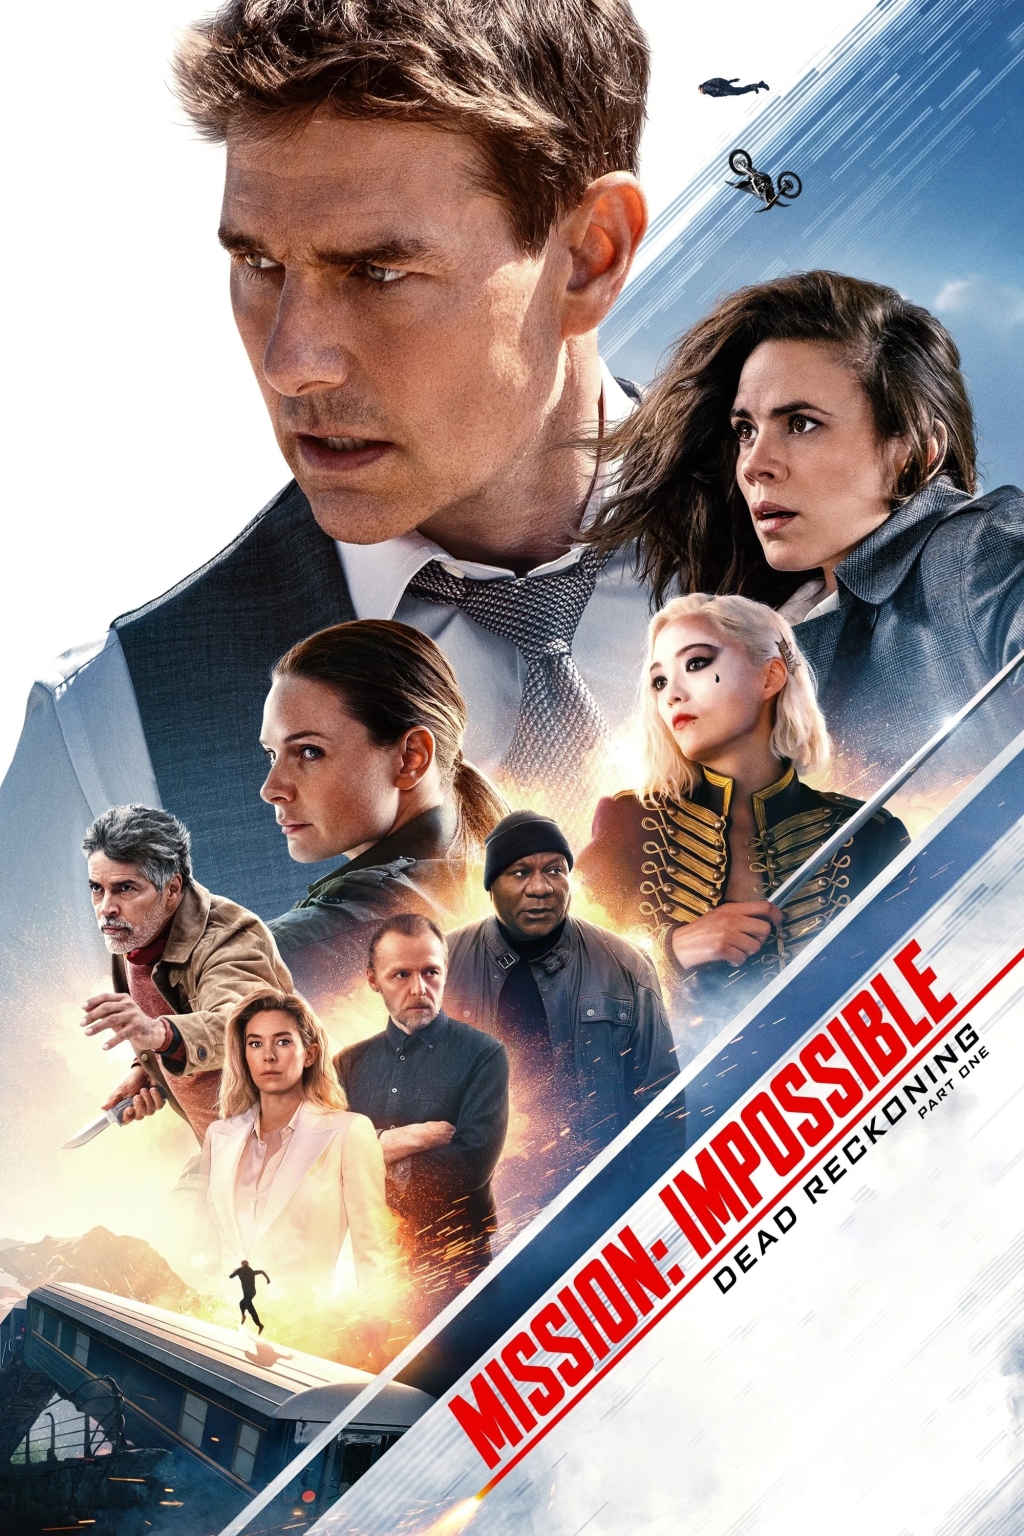 Mission Impossible Dead Reckoning Part 1 – Not a masterpiece but pretty okay.